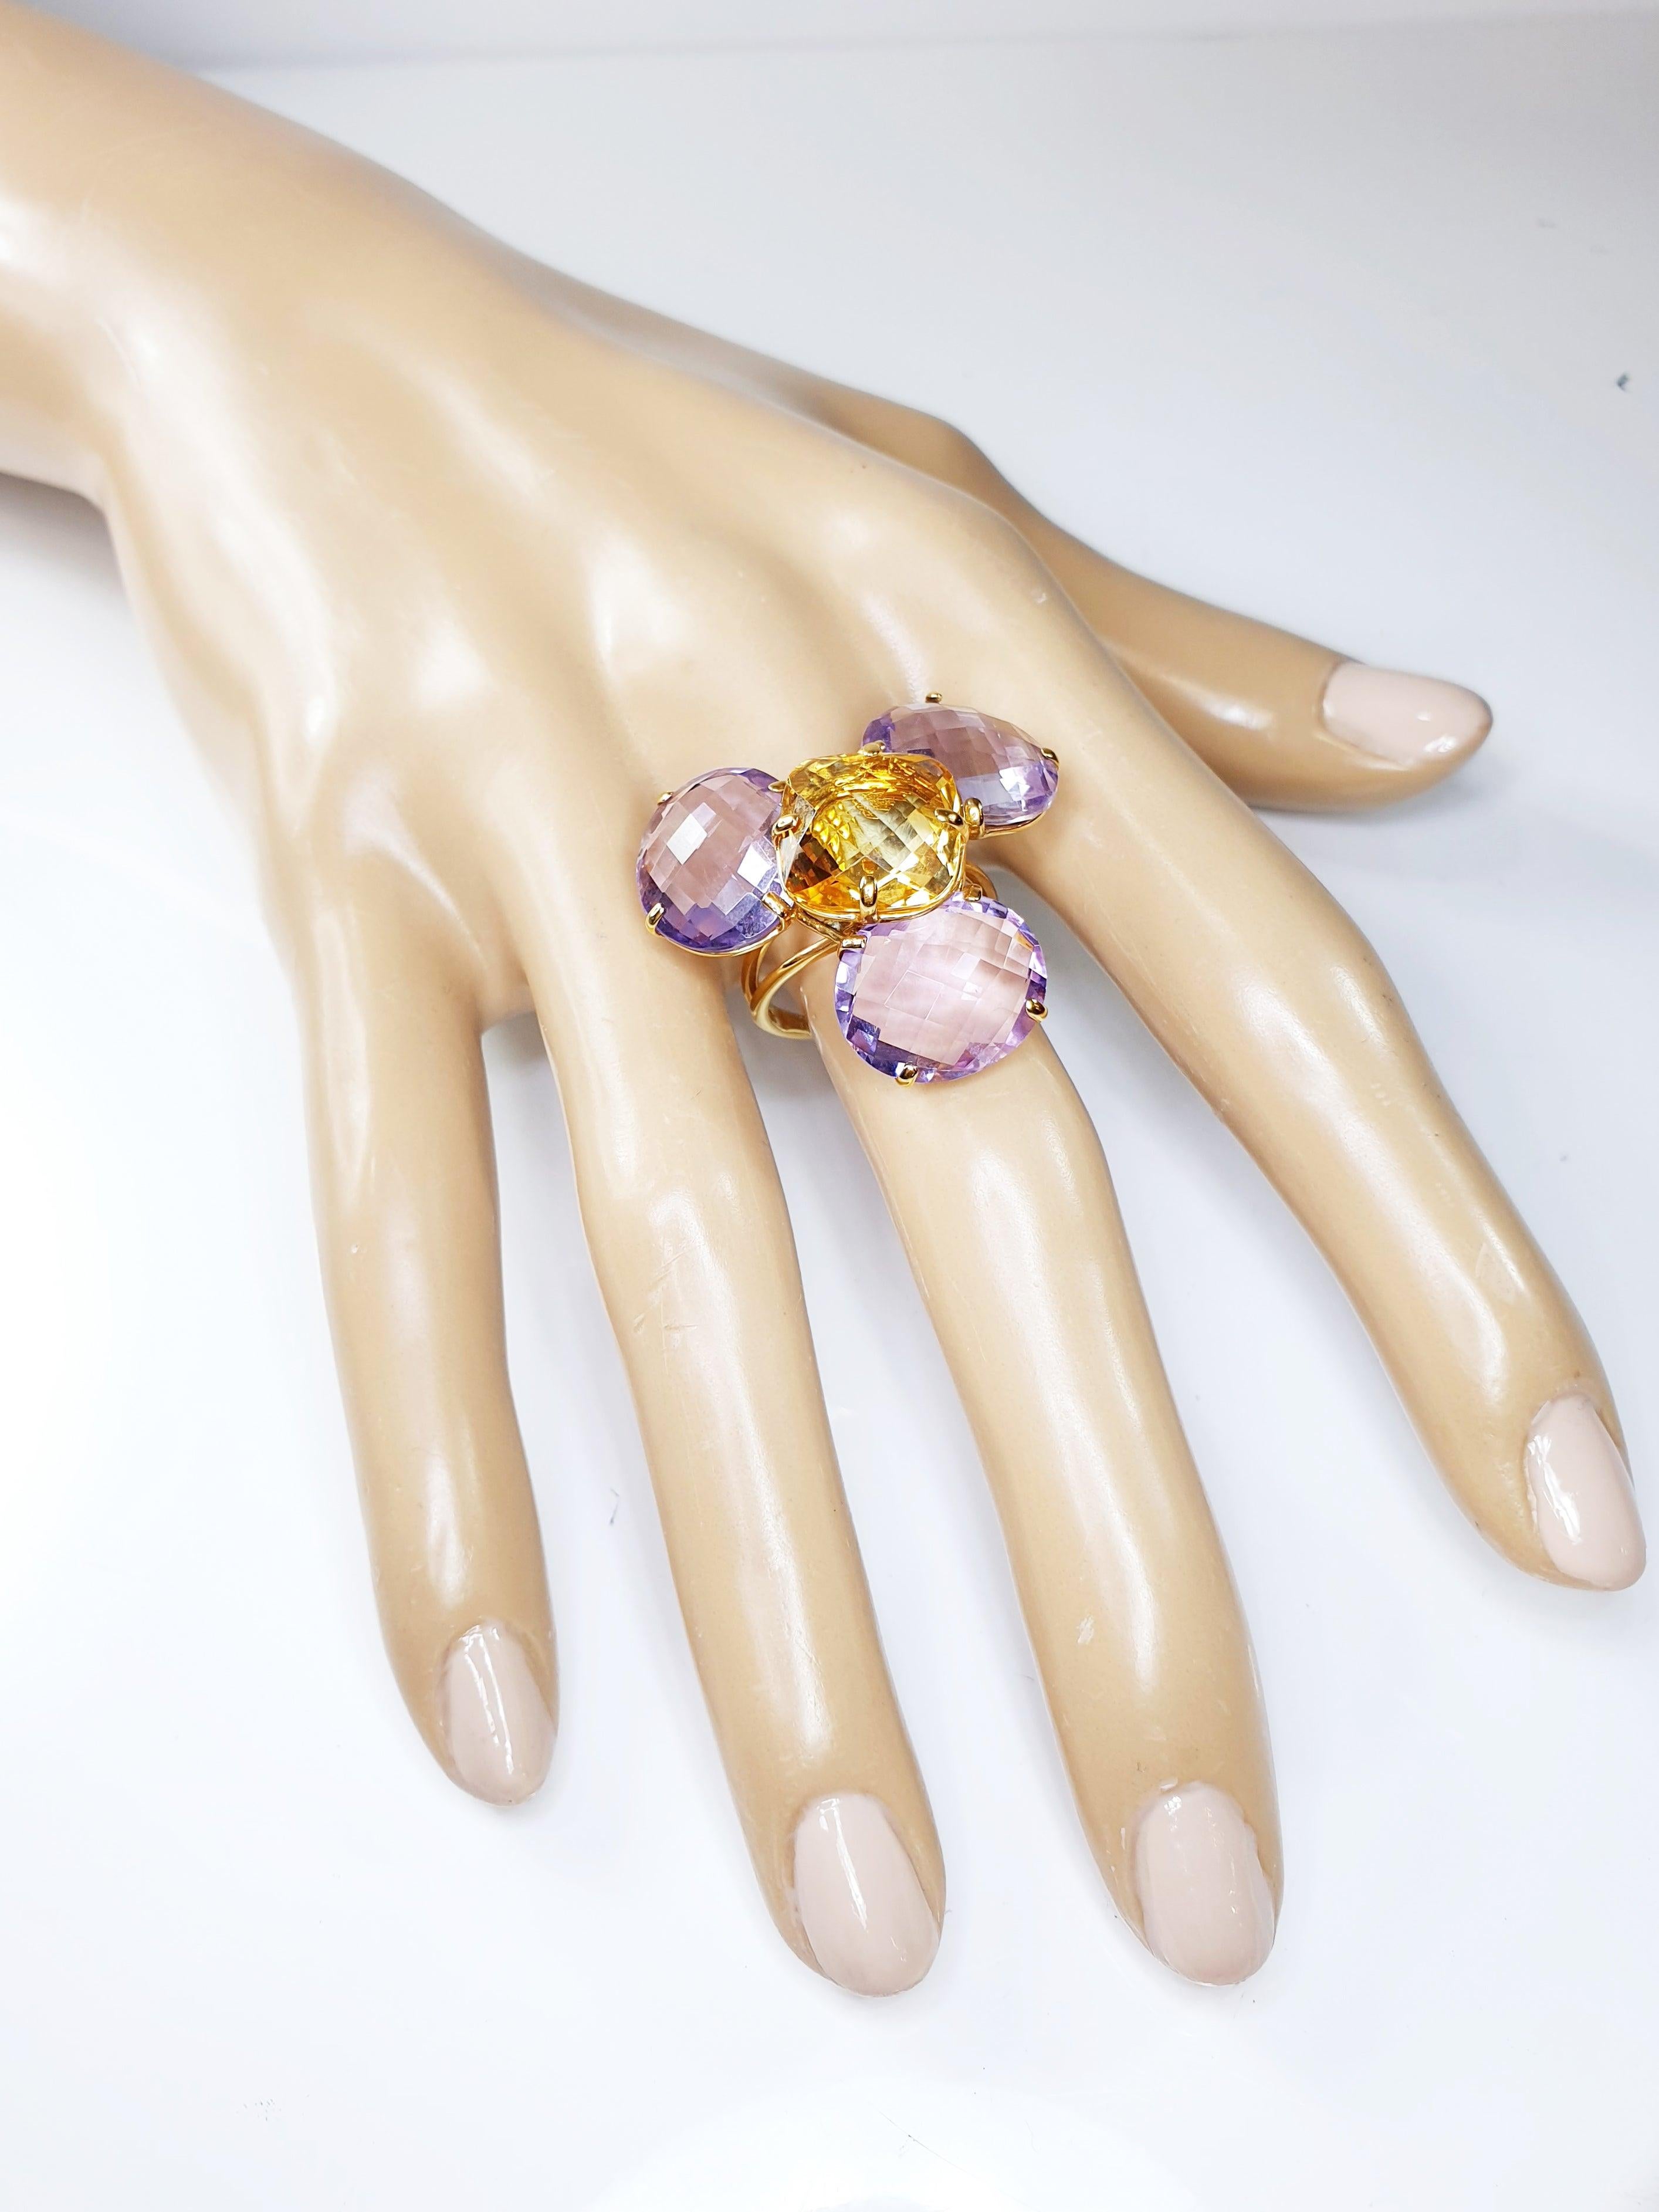 Multiphaceted Flower Ring with Central Citrine and Three Amethysts 8